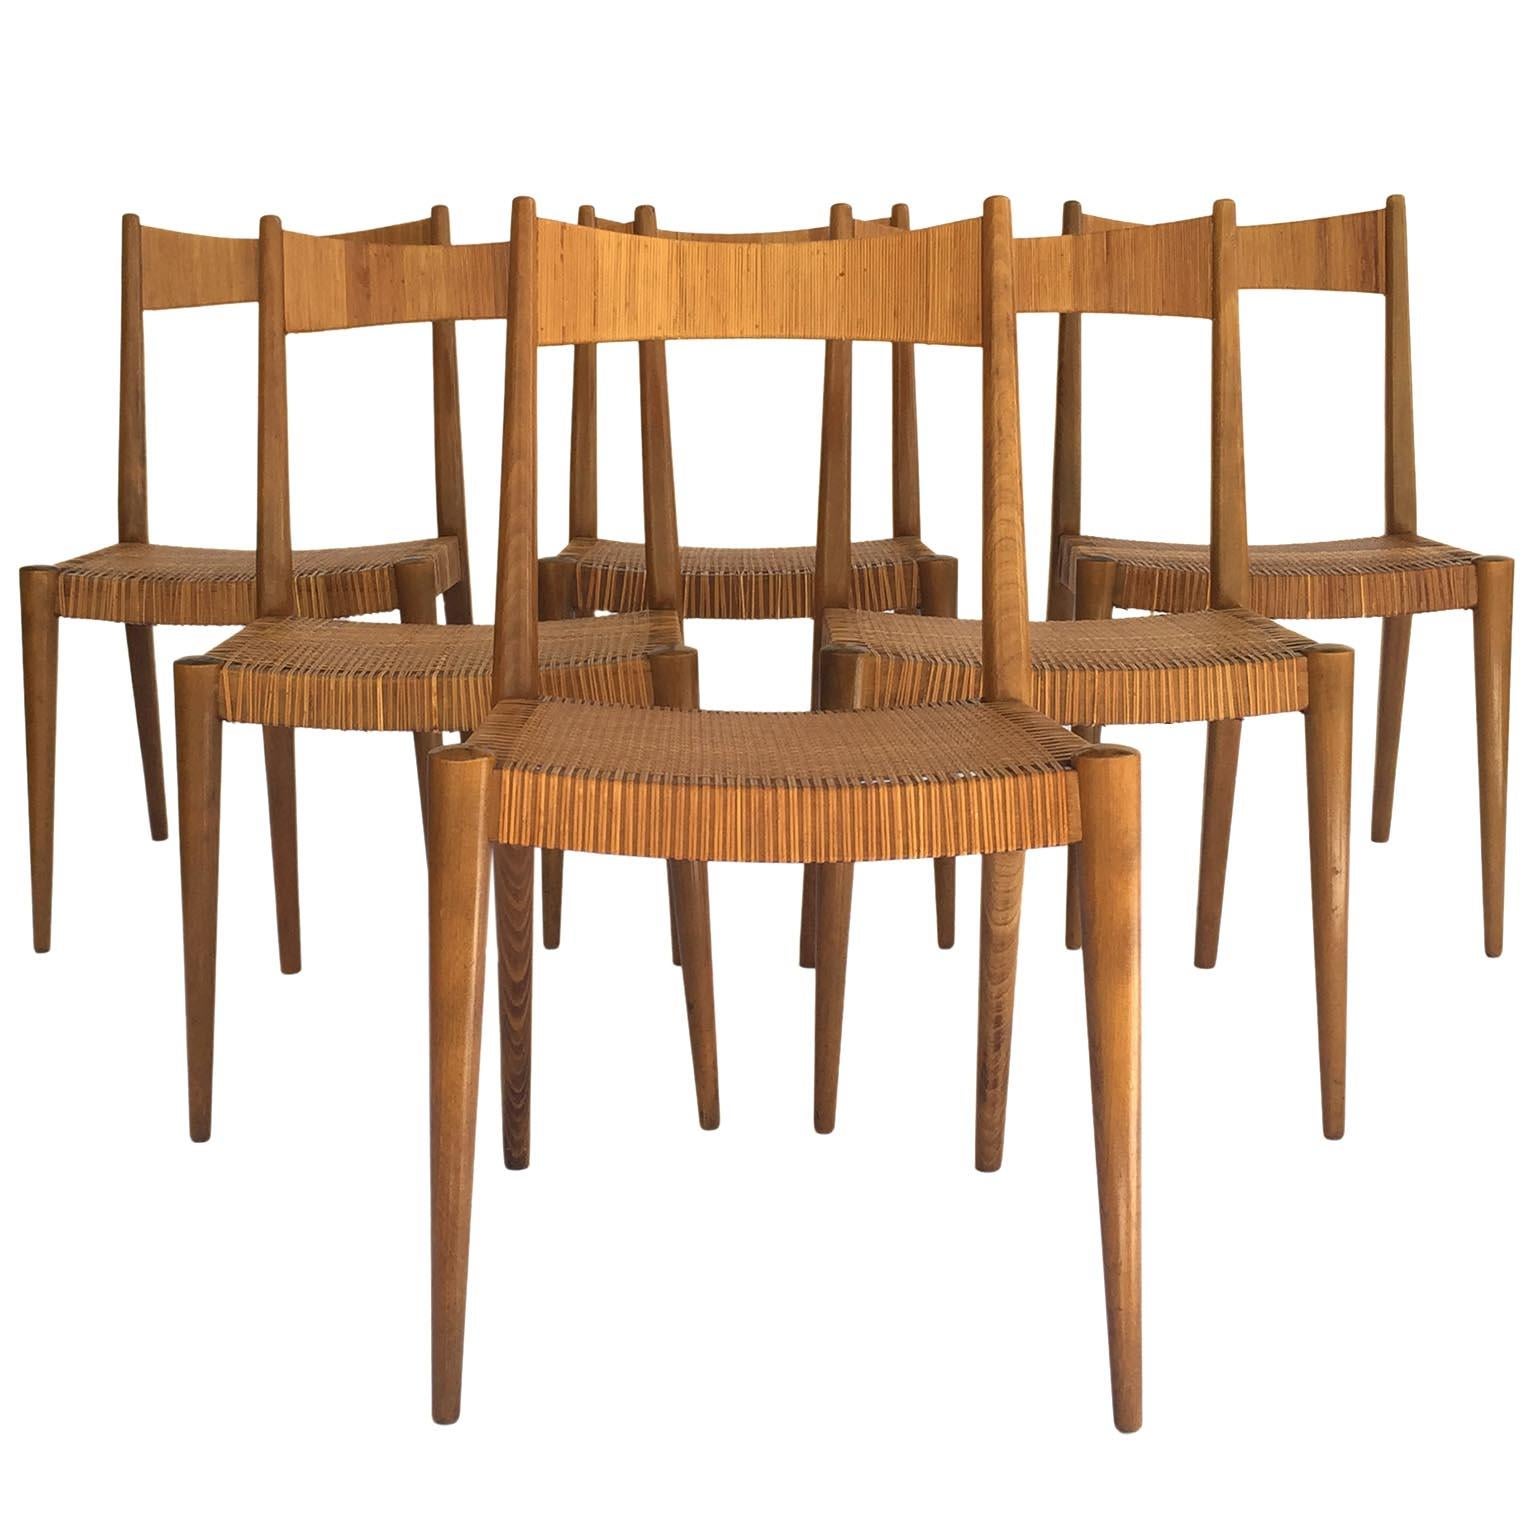 A set of six dining room or side chairs designed by Anna-Luelja Praun (1906-2004), Vienna, Austria, manufactured in midcentury, circa 1950.
The seats and backs are covered with cane or wicker. A few of the cane has been restored and replaced with